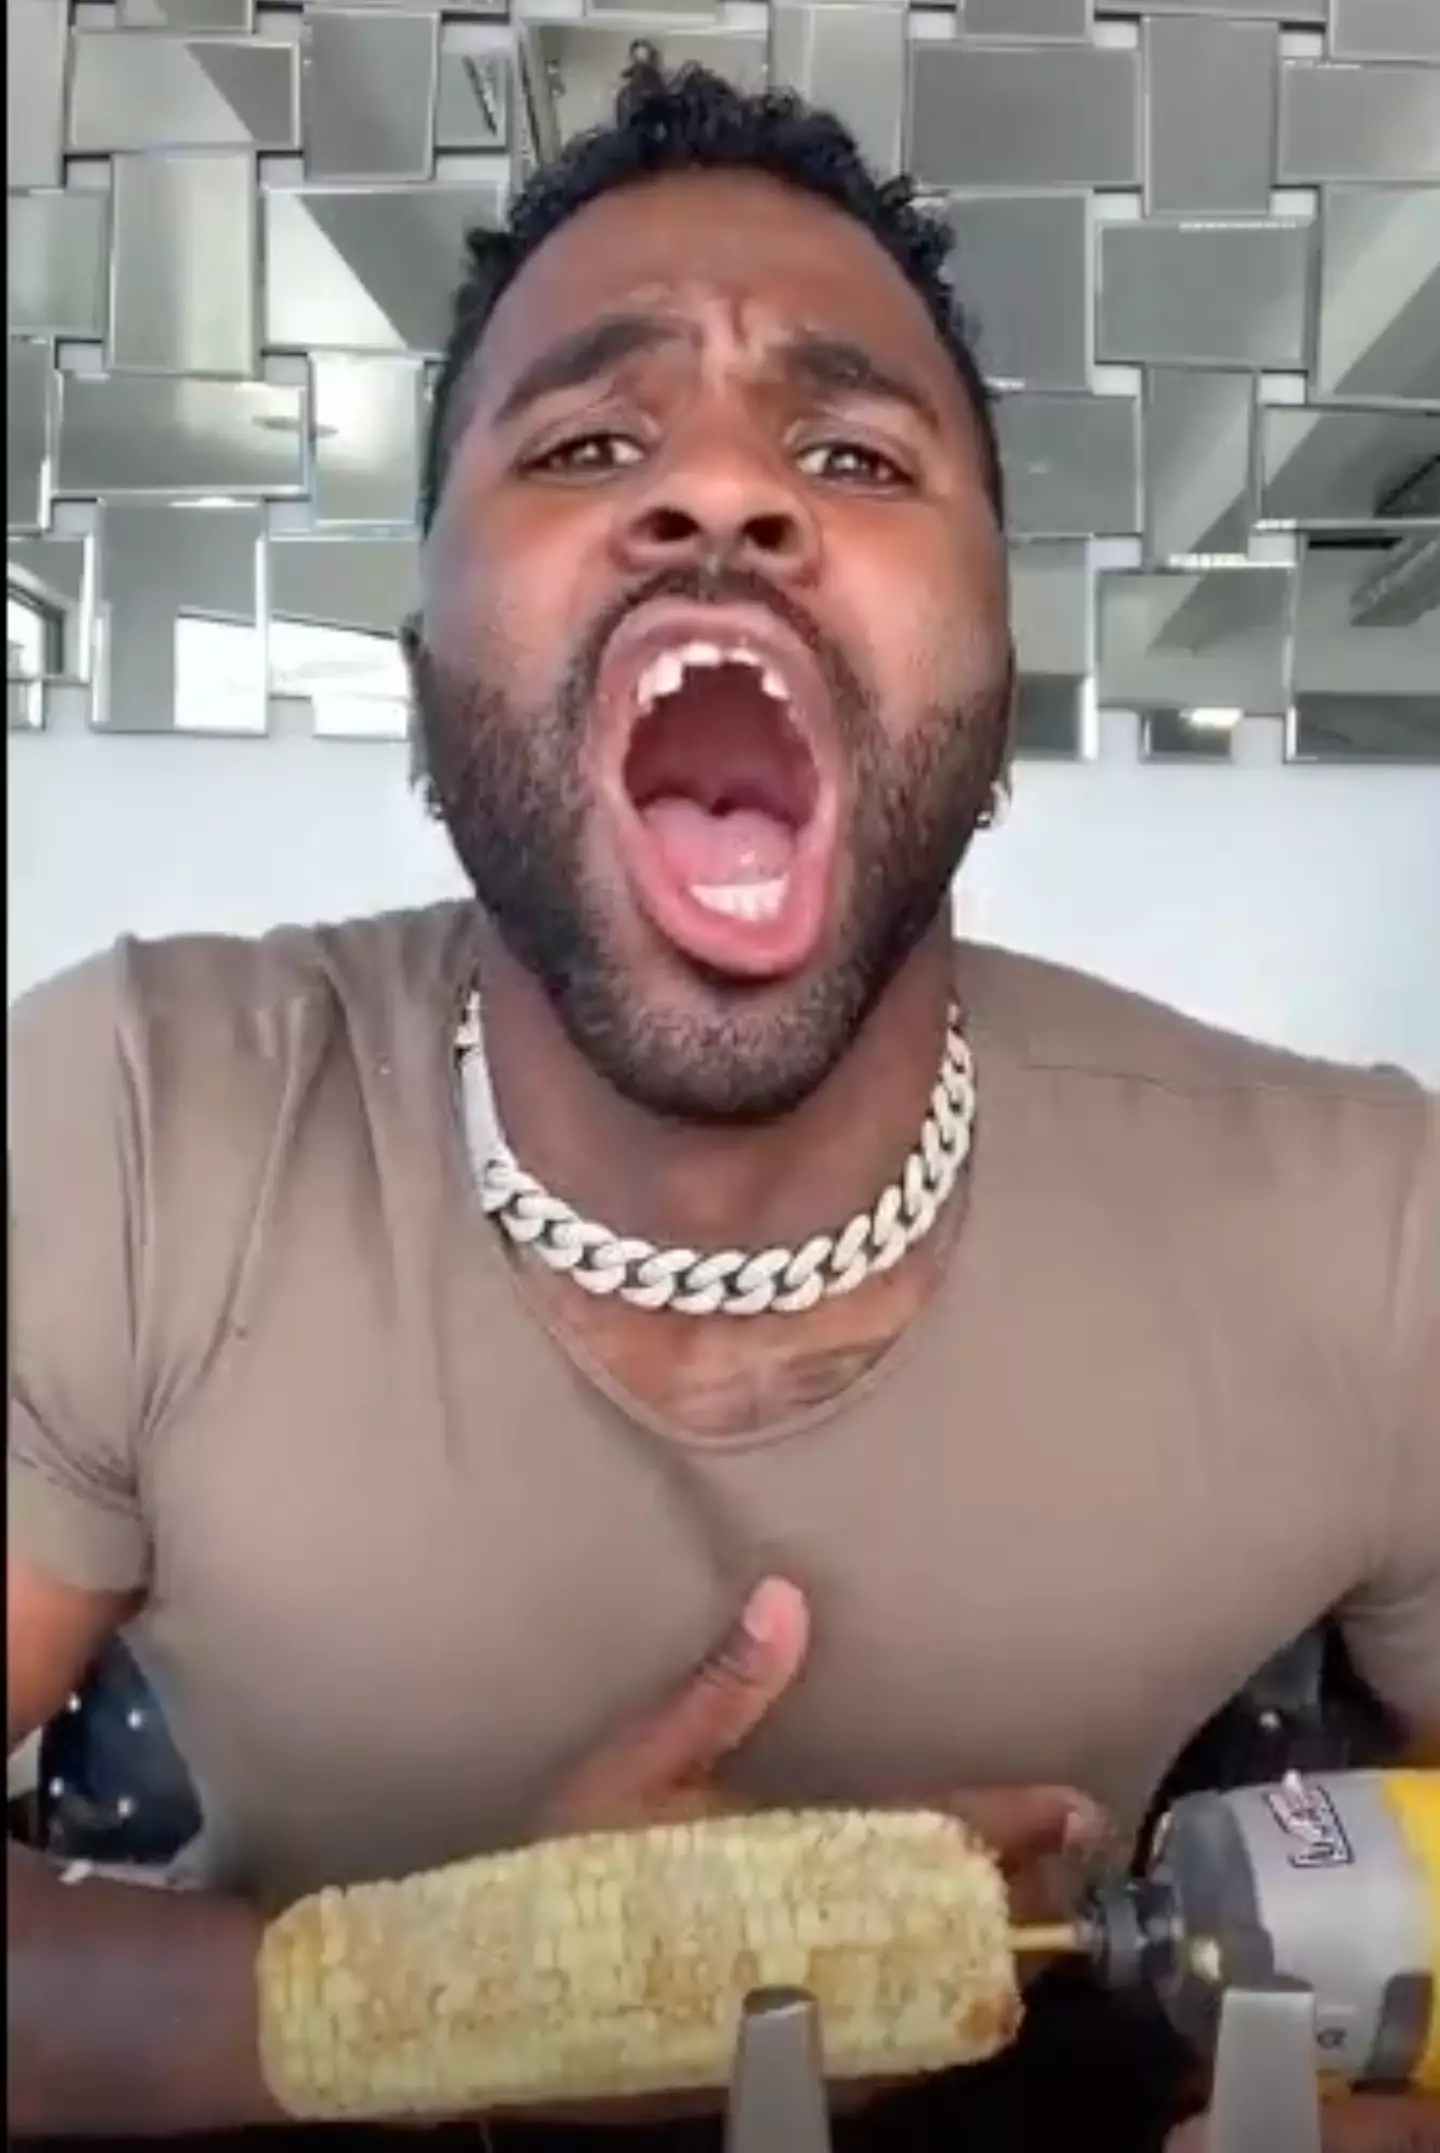 Rather predictably - he screamed in pain and pulled the power tool away to reveal that his two front teeth had been badly chipped.(Jason Derulo/TikTok)